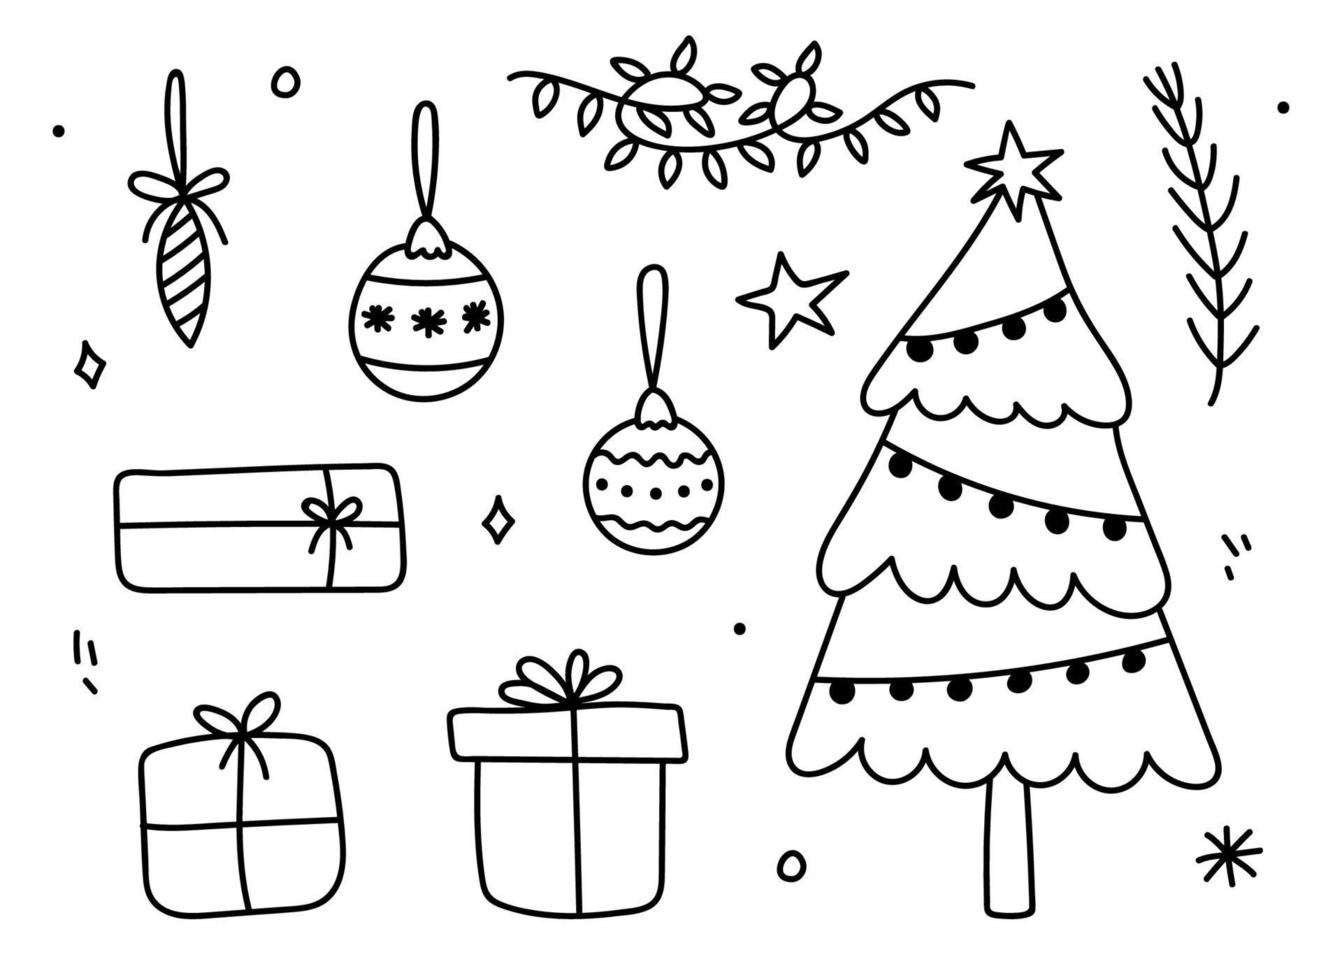 Set of winter doodles - a decorated Christmas tree, garlands, gifts, Christmas baubles and spruce branch. Vector cartoon hand-drawn illustration. Perfect for holiday designs, cards, invitations.